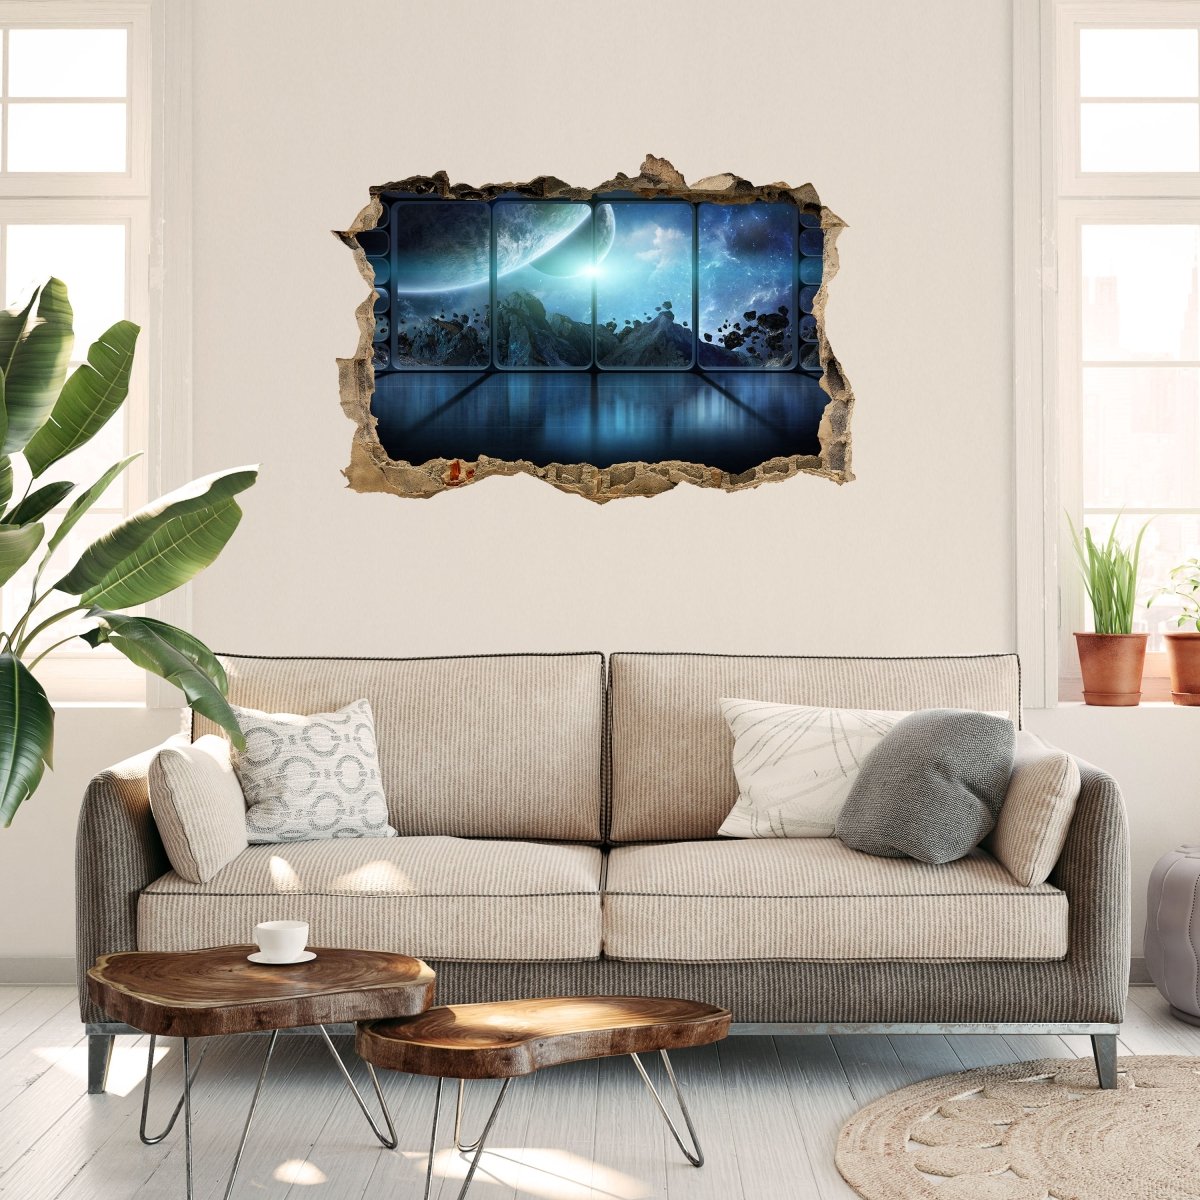 Sticker mural 3D vue station spatiale, astéroïde, univers - Wall Decal M1072